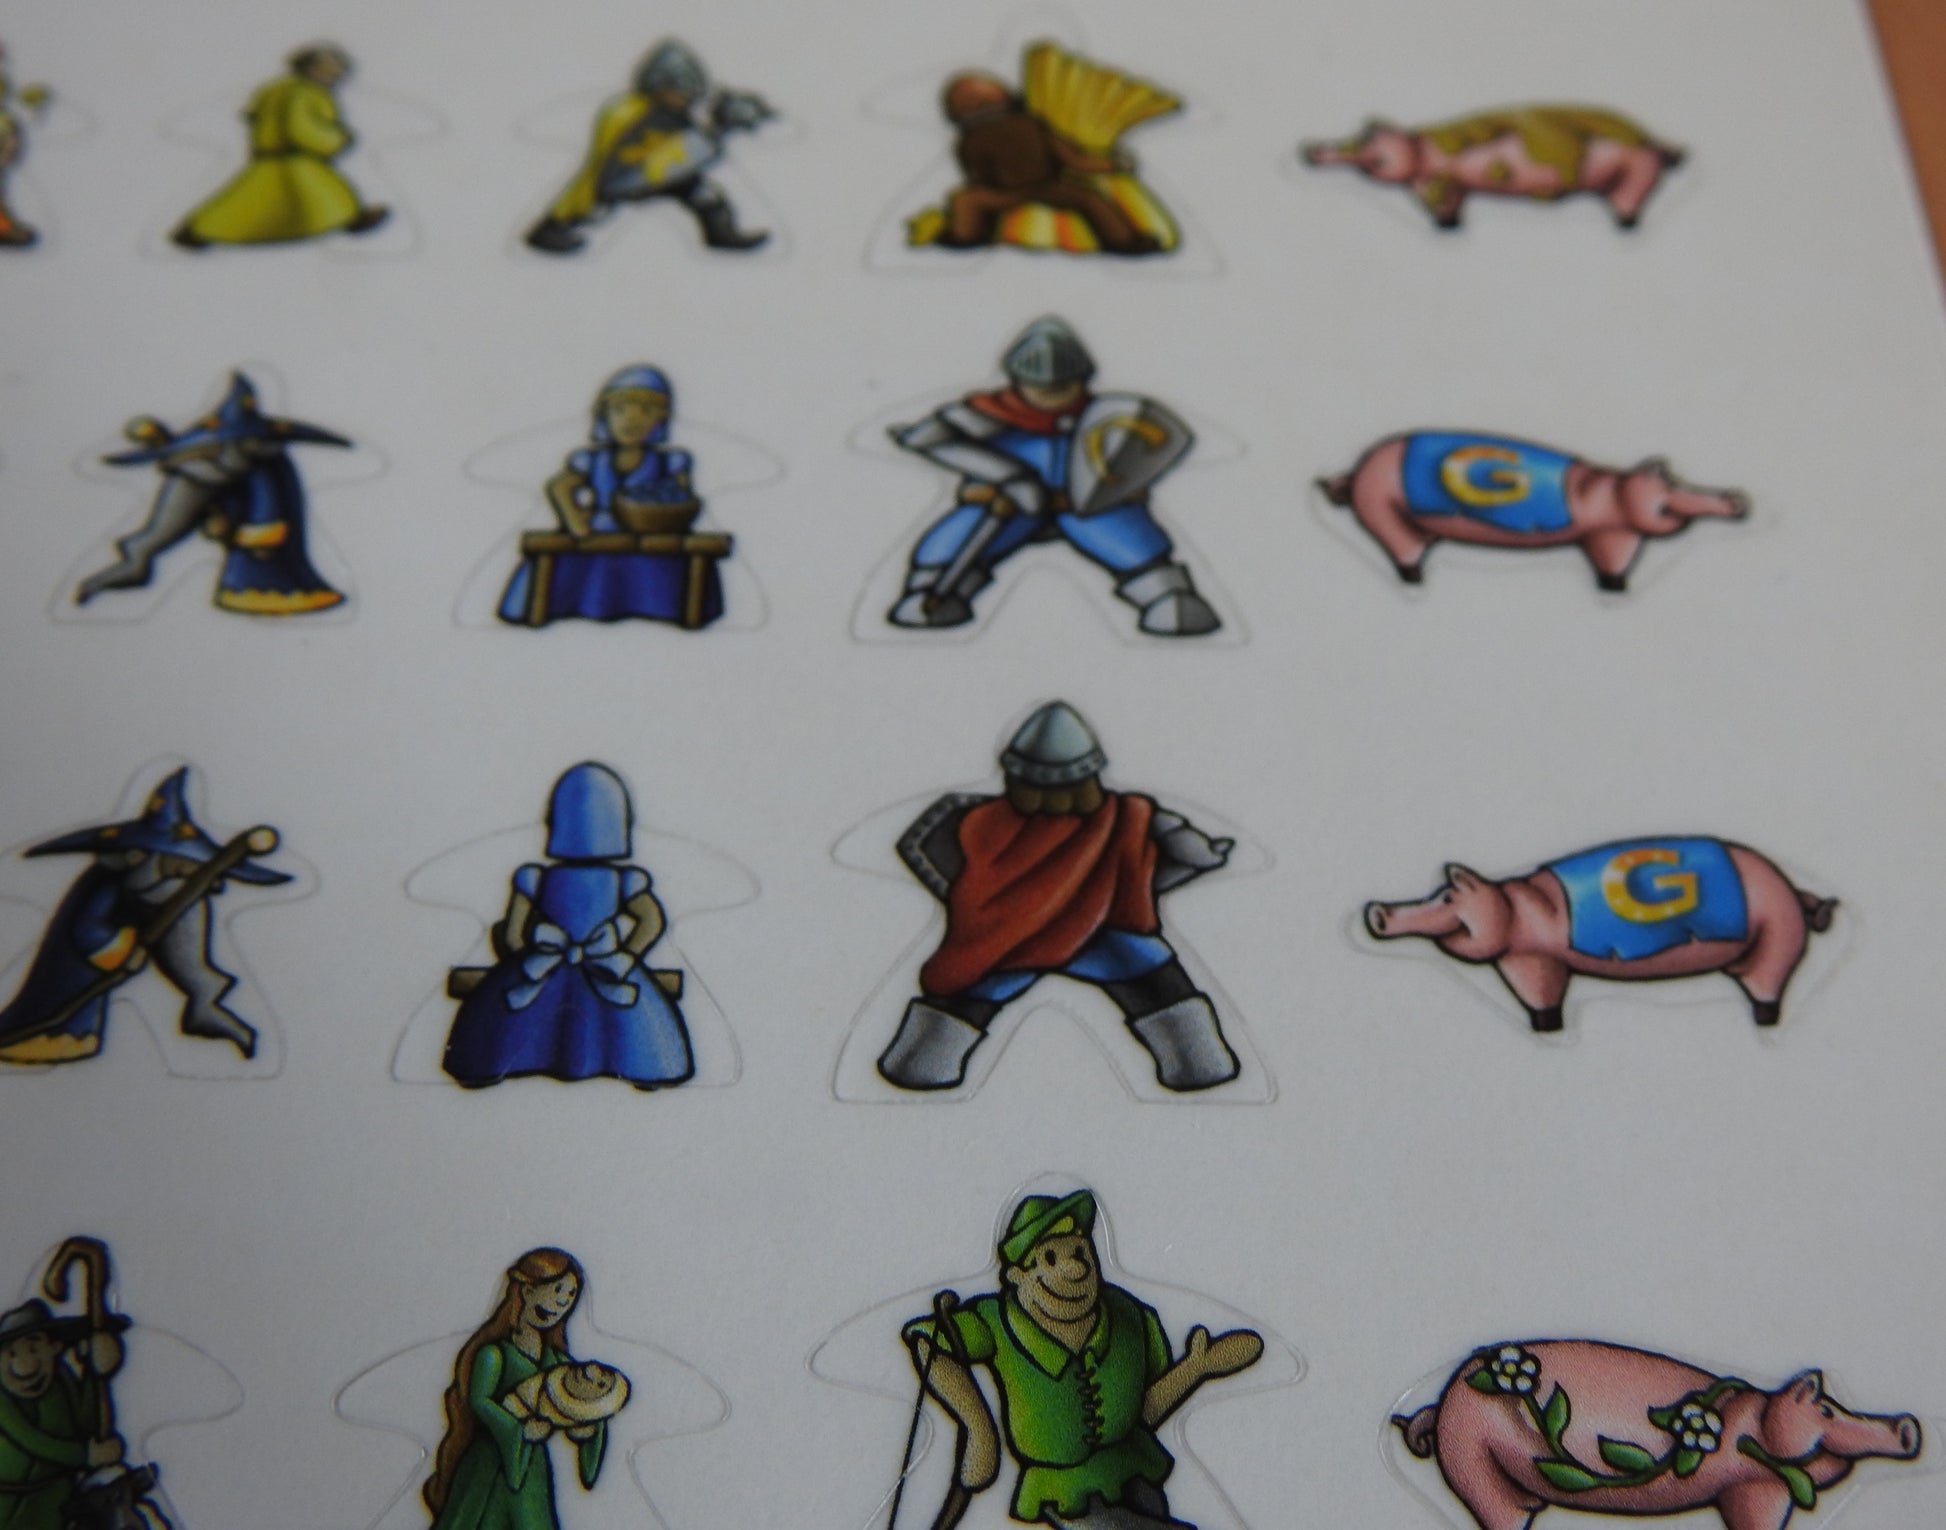 Close-up of four rows of Carcassonne meeple stickers, showing pigs and medieval knights!